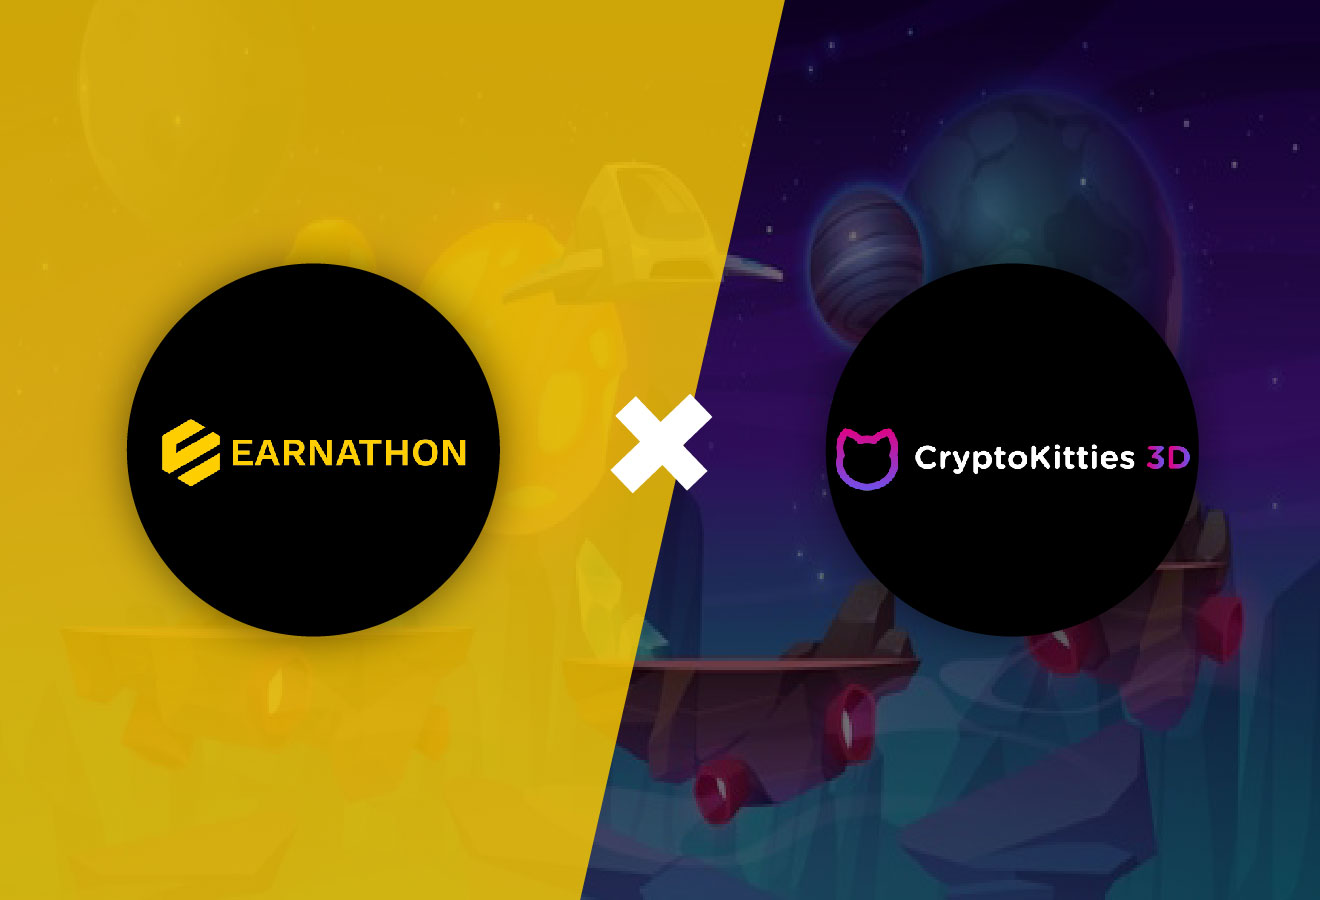 Earnathon and Crypto Kitties 3D have entered into a partnership to drive blockchain and cryptocurrency education and awareness with specific focus on blockchain based gaming.